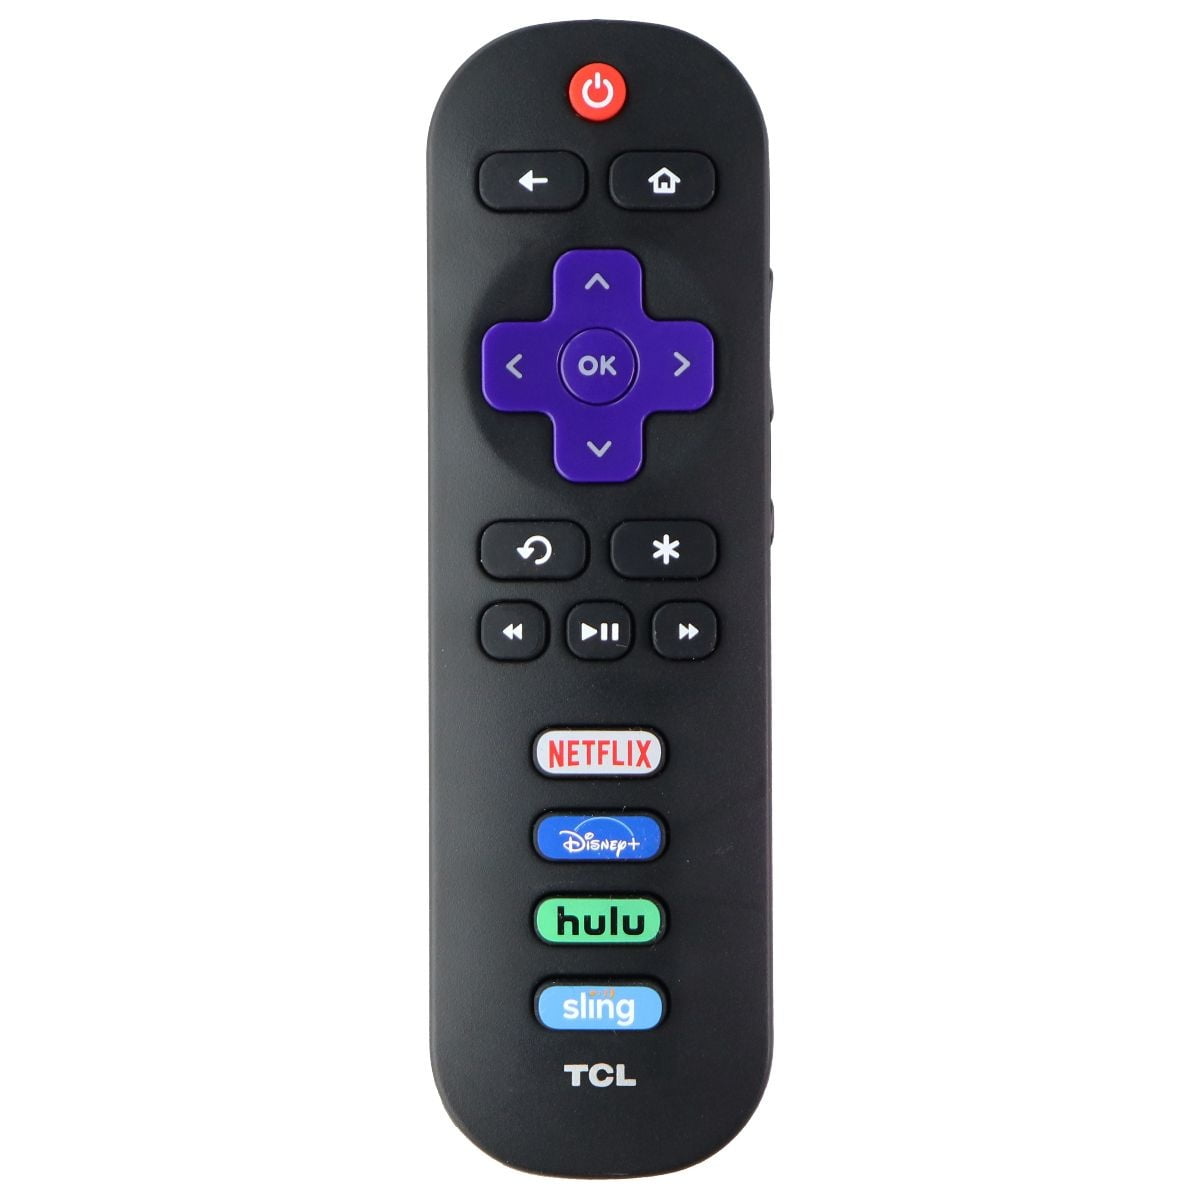 Remote Control For TCL TV ‒ Applications sur Google Play